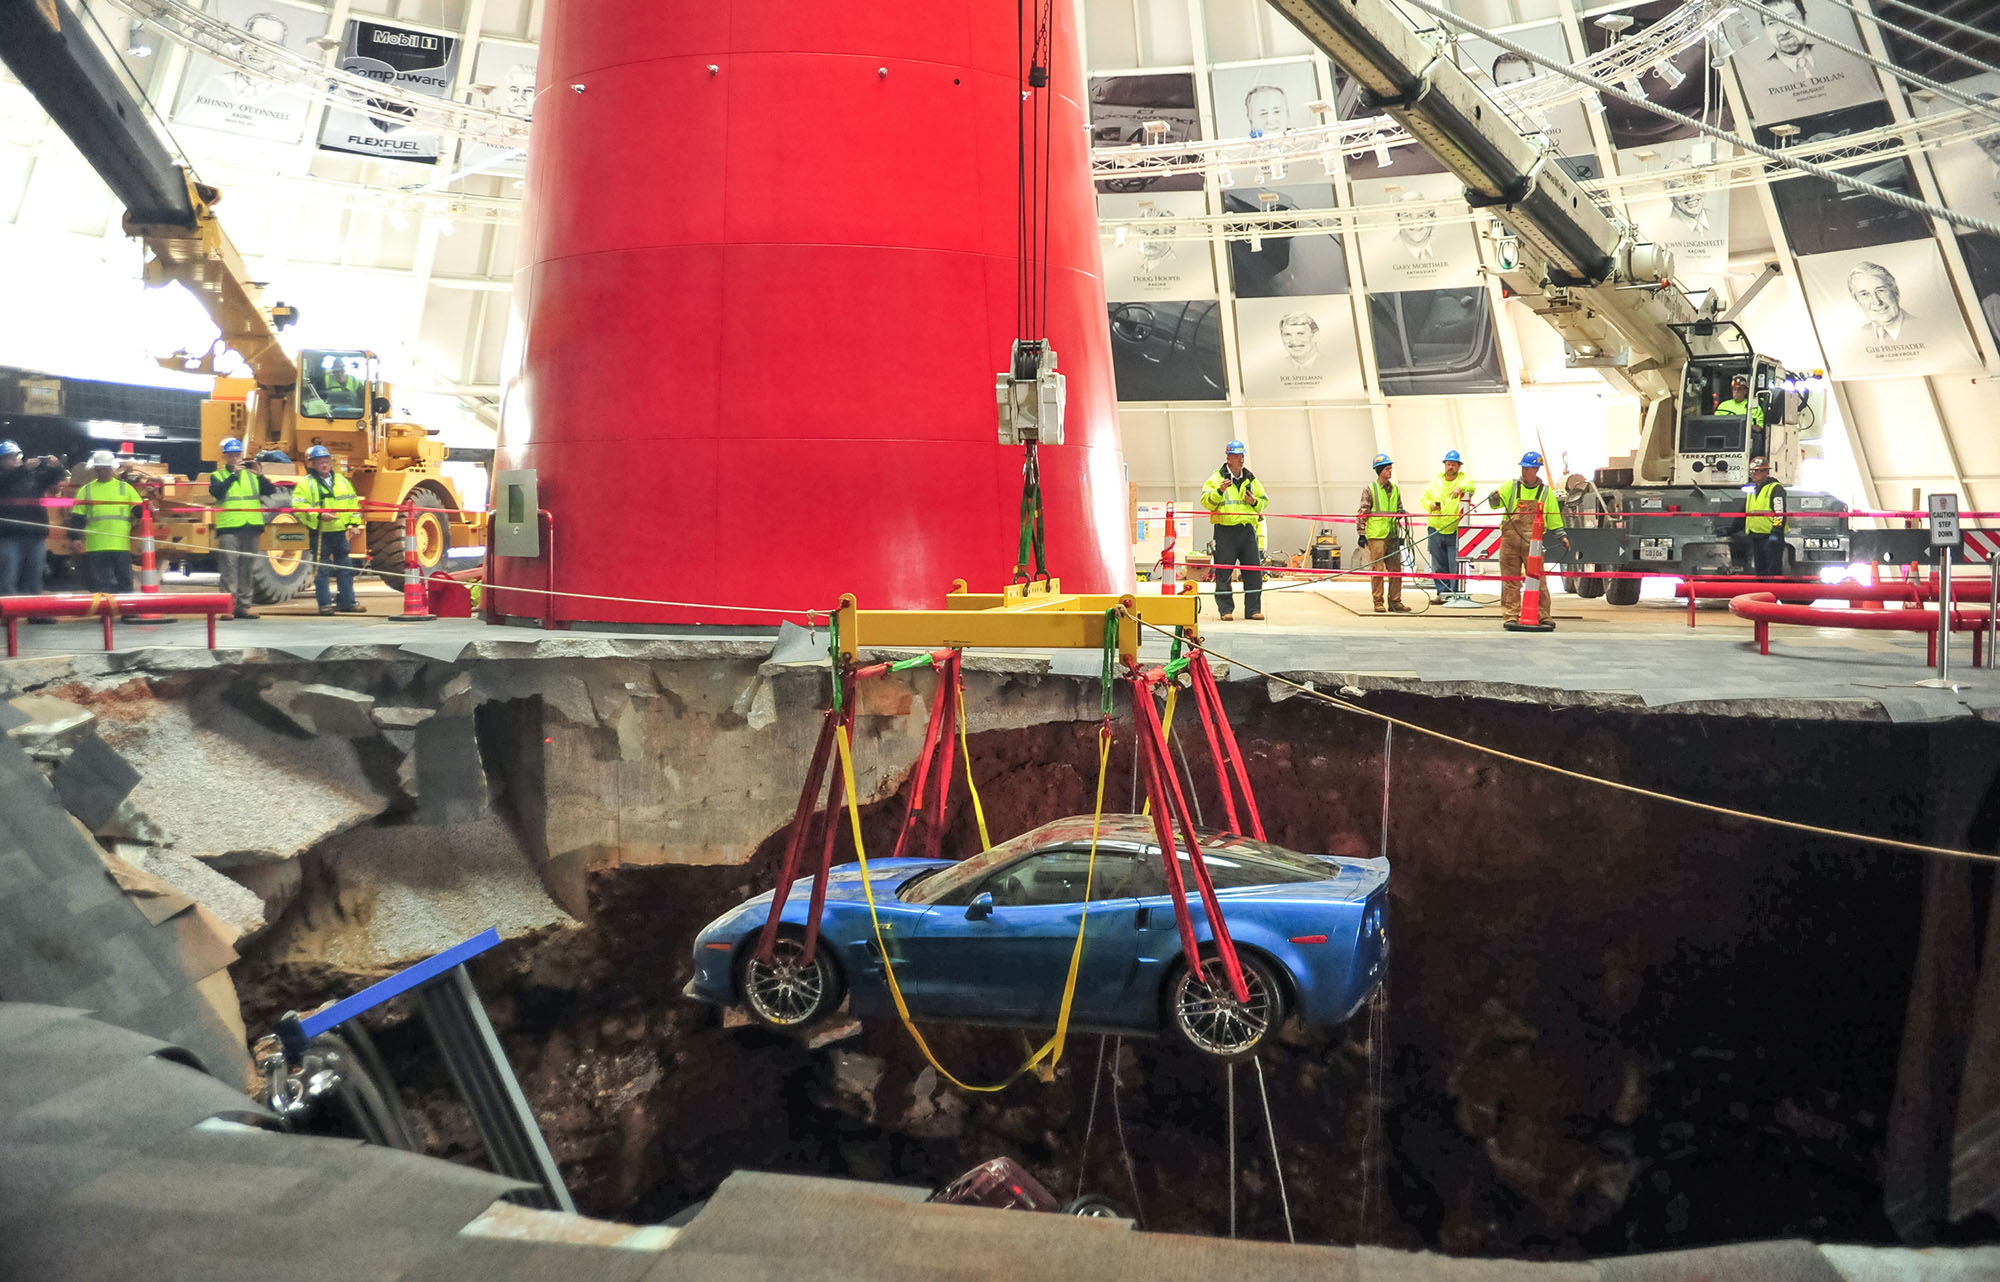 The 2009 Chevrolet Corvette ZR-1 being lifted from the 2014 sinkhole at the Corvette Museum